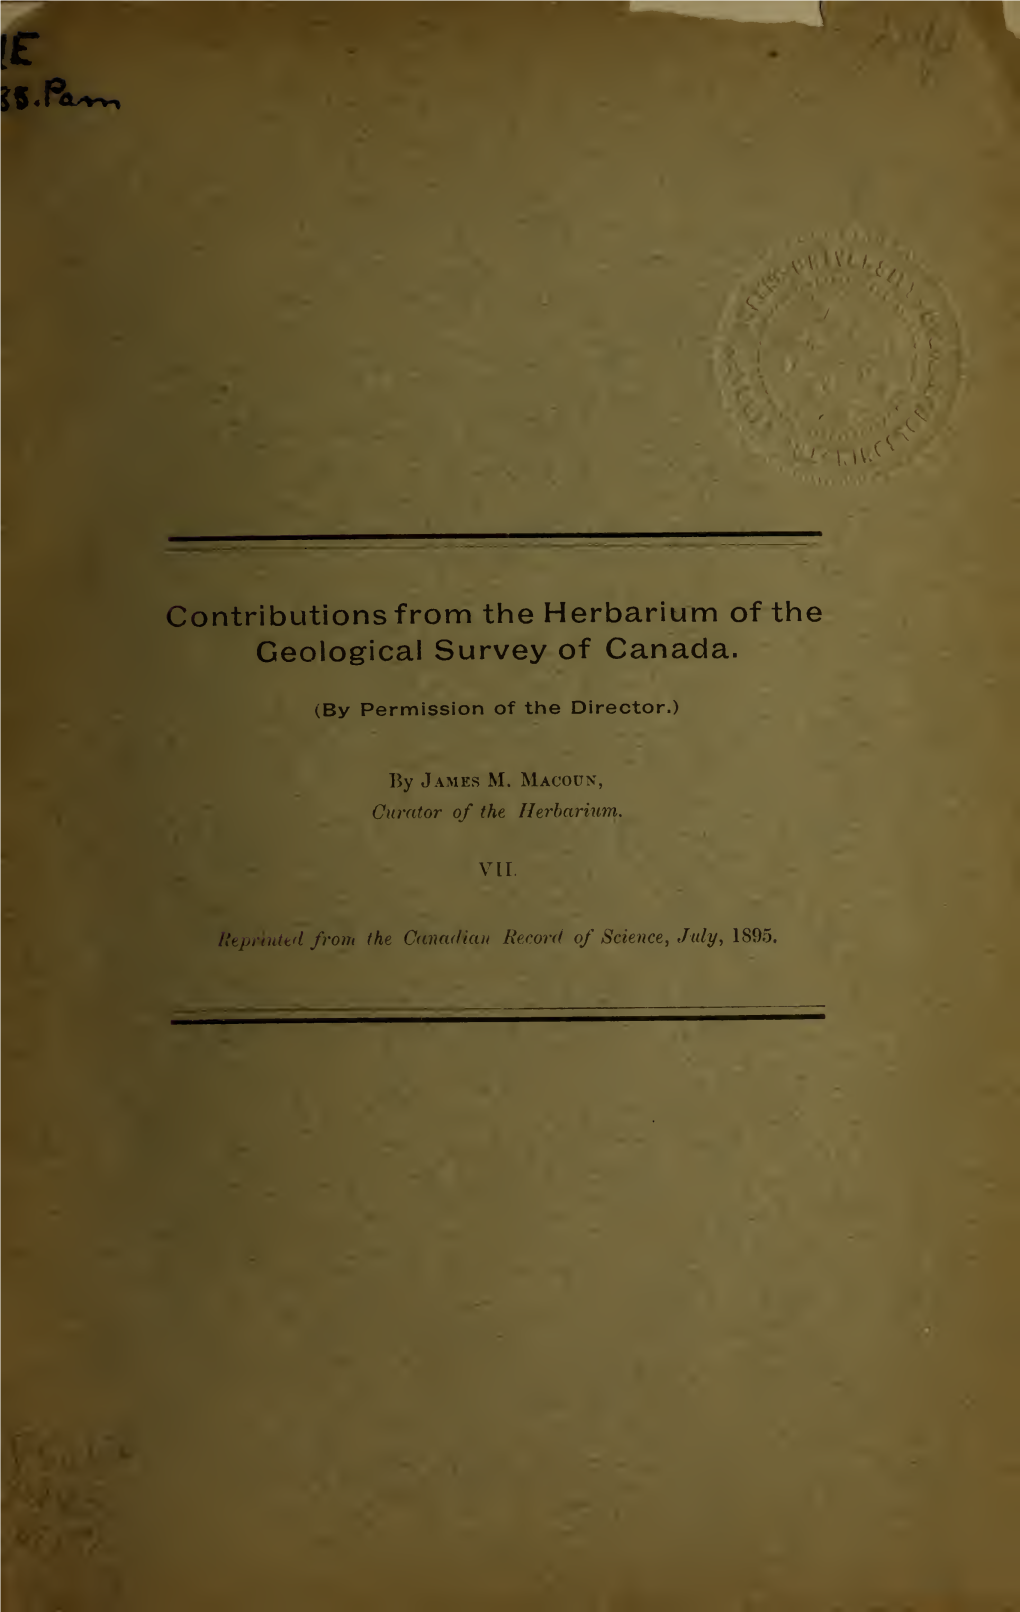 Contributions to Canadian Botany